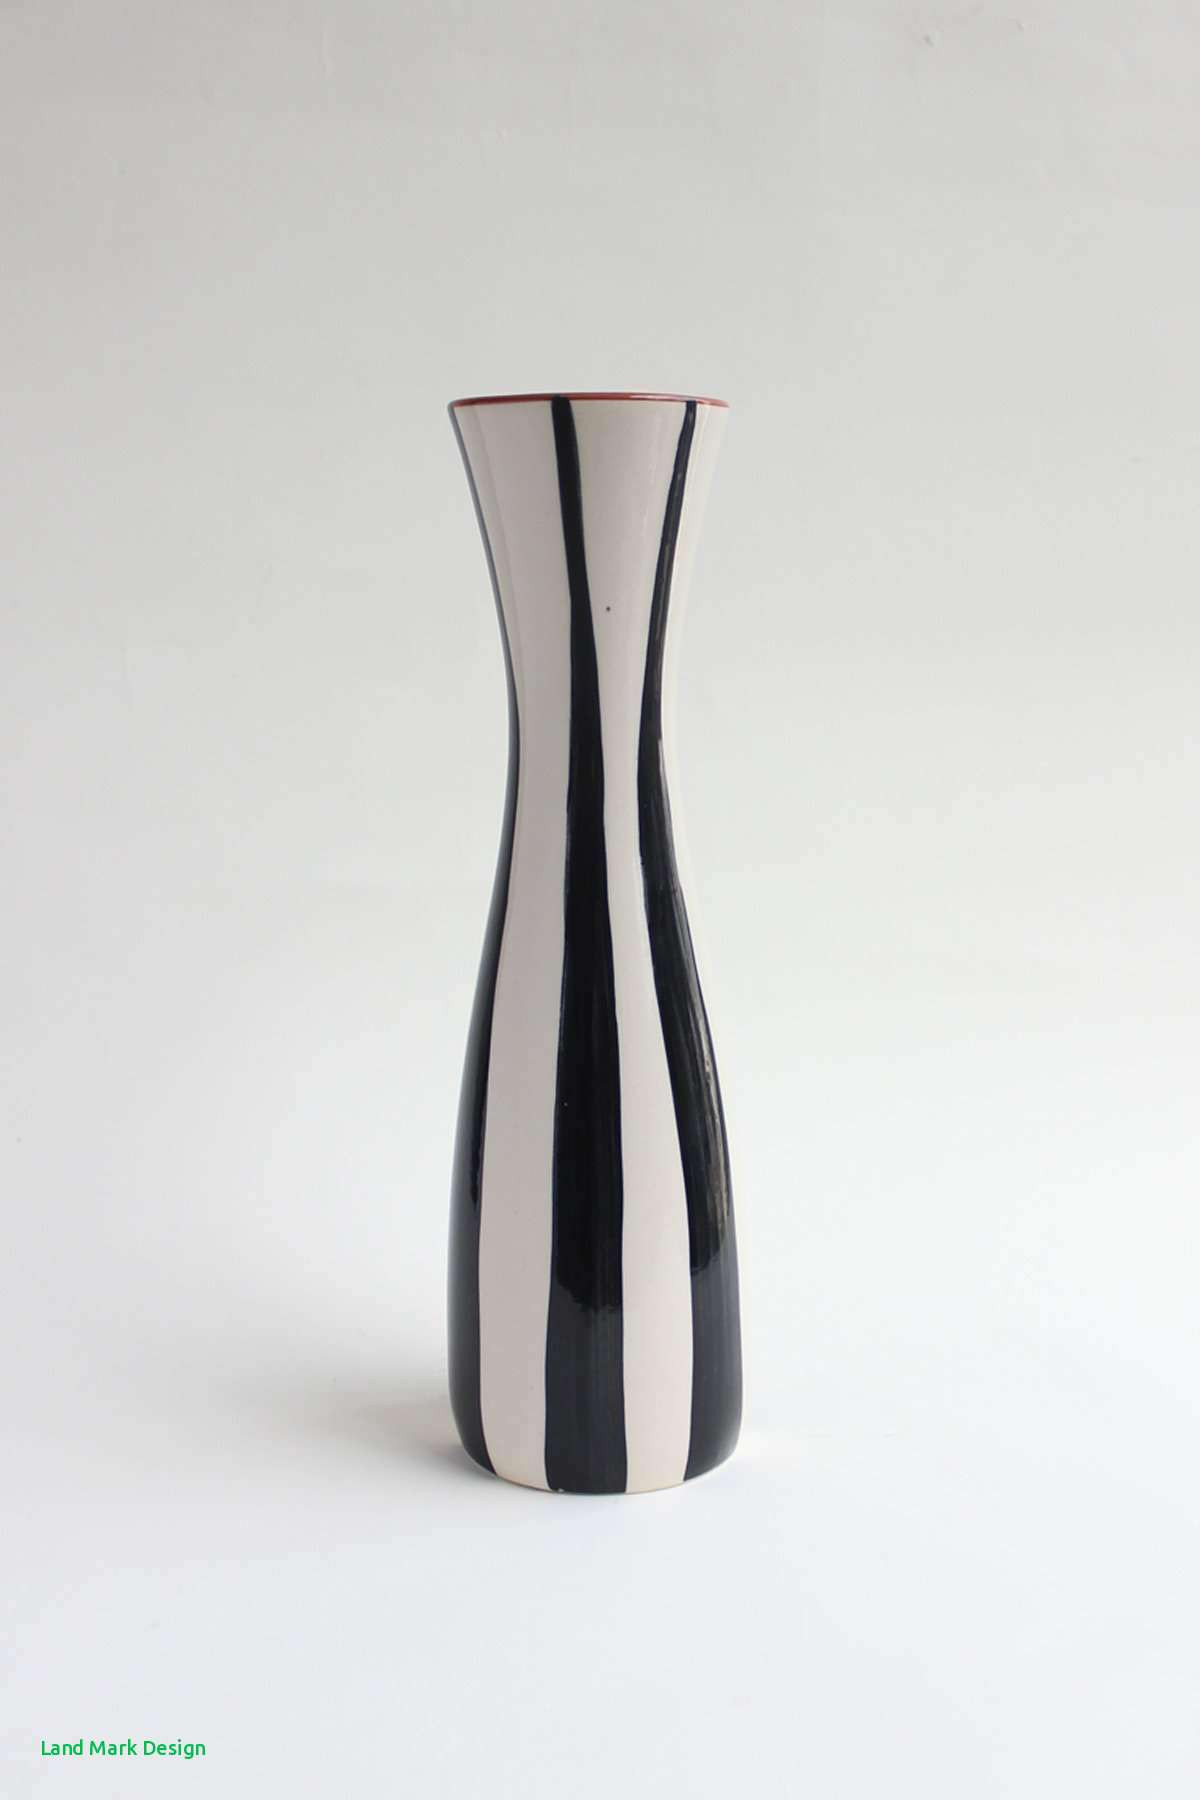 14 Unique Ming Vases Designs 2023 free download ming vases designs of large white vases collection what color goes with black and white regarding large white vases collection what color goes with black and white